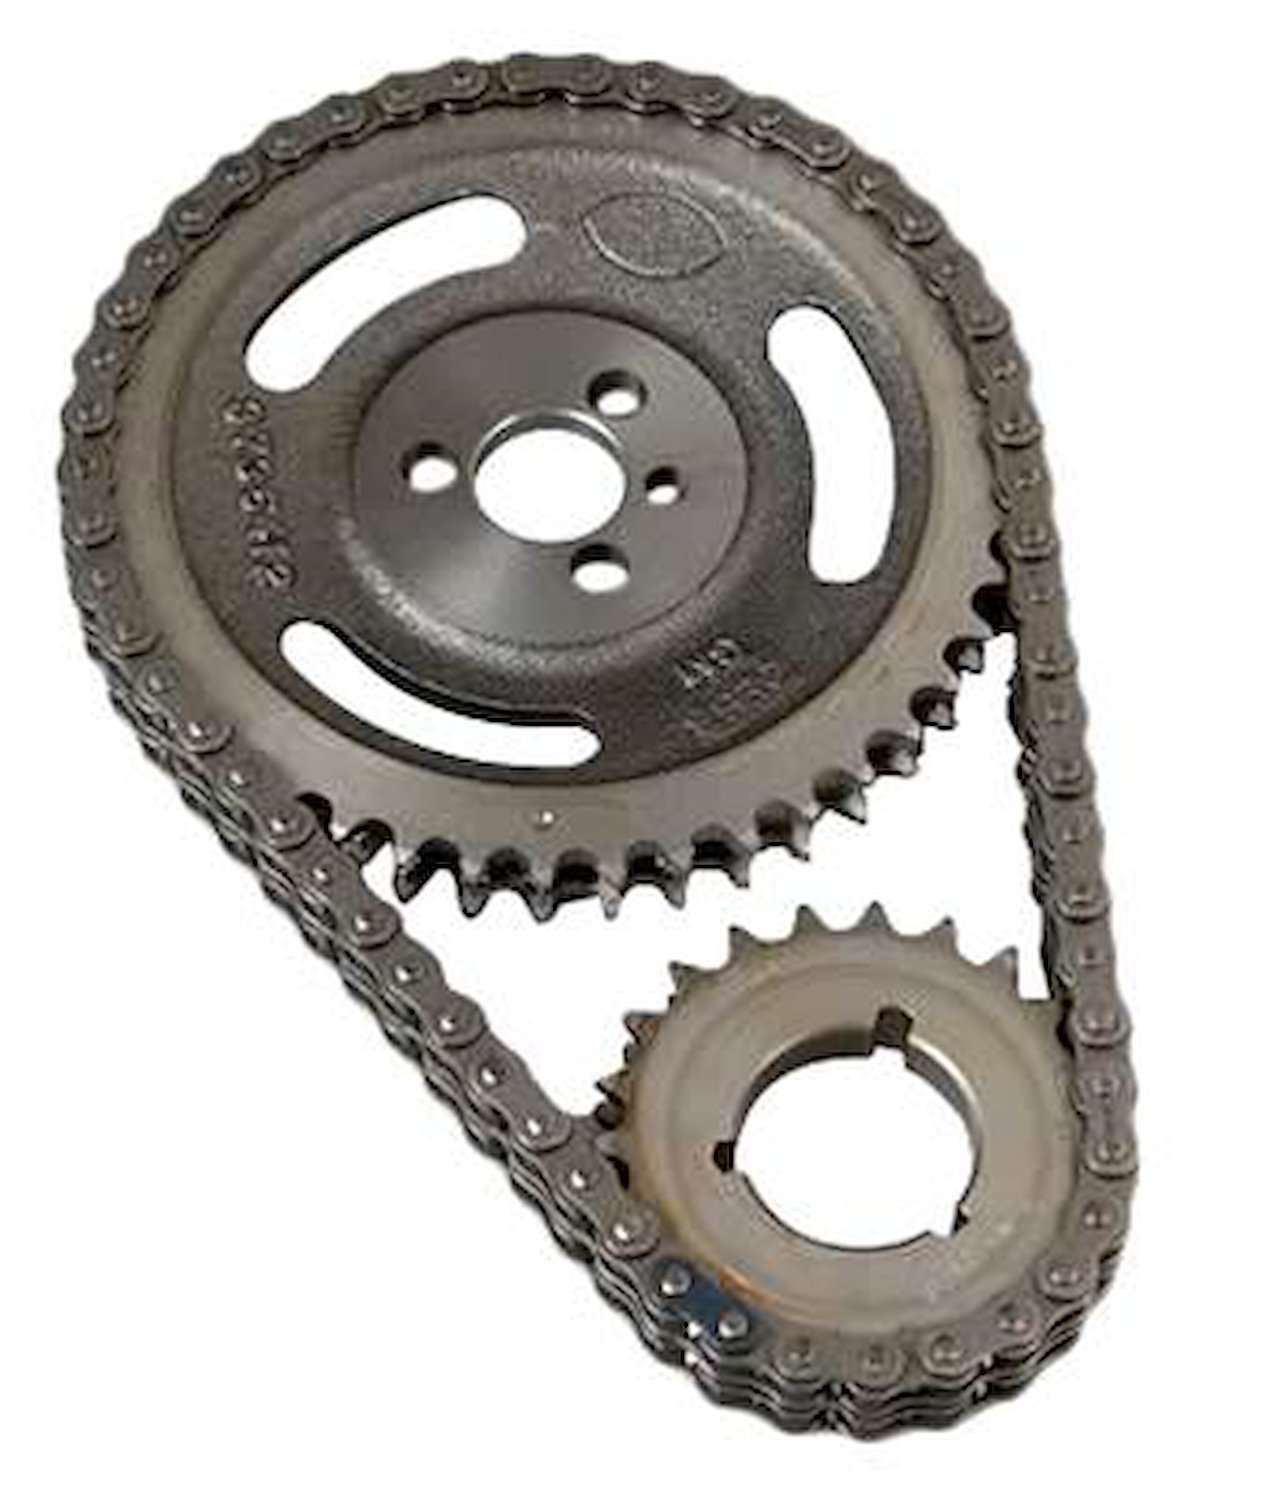 Timing Chain Set for 1955-1991 Small Block Chevy